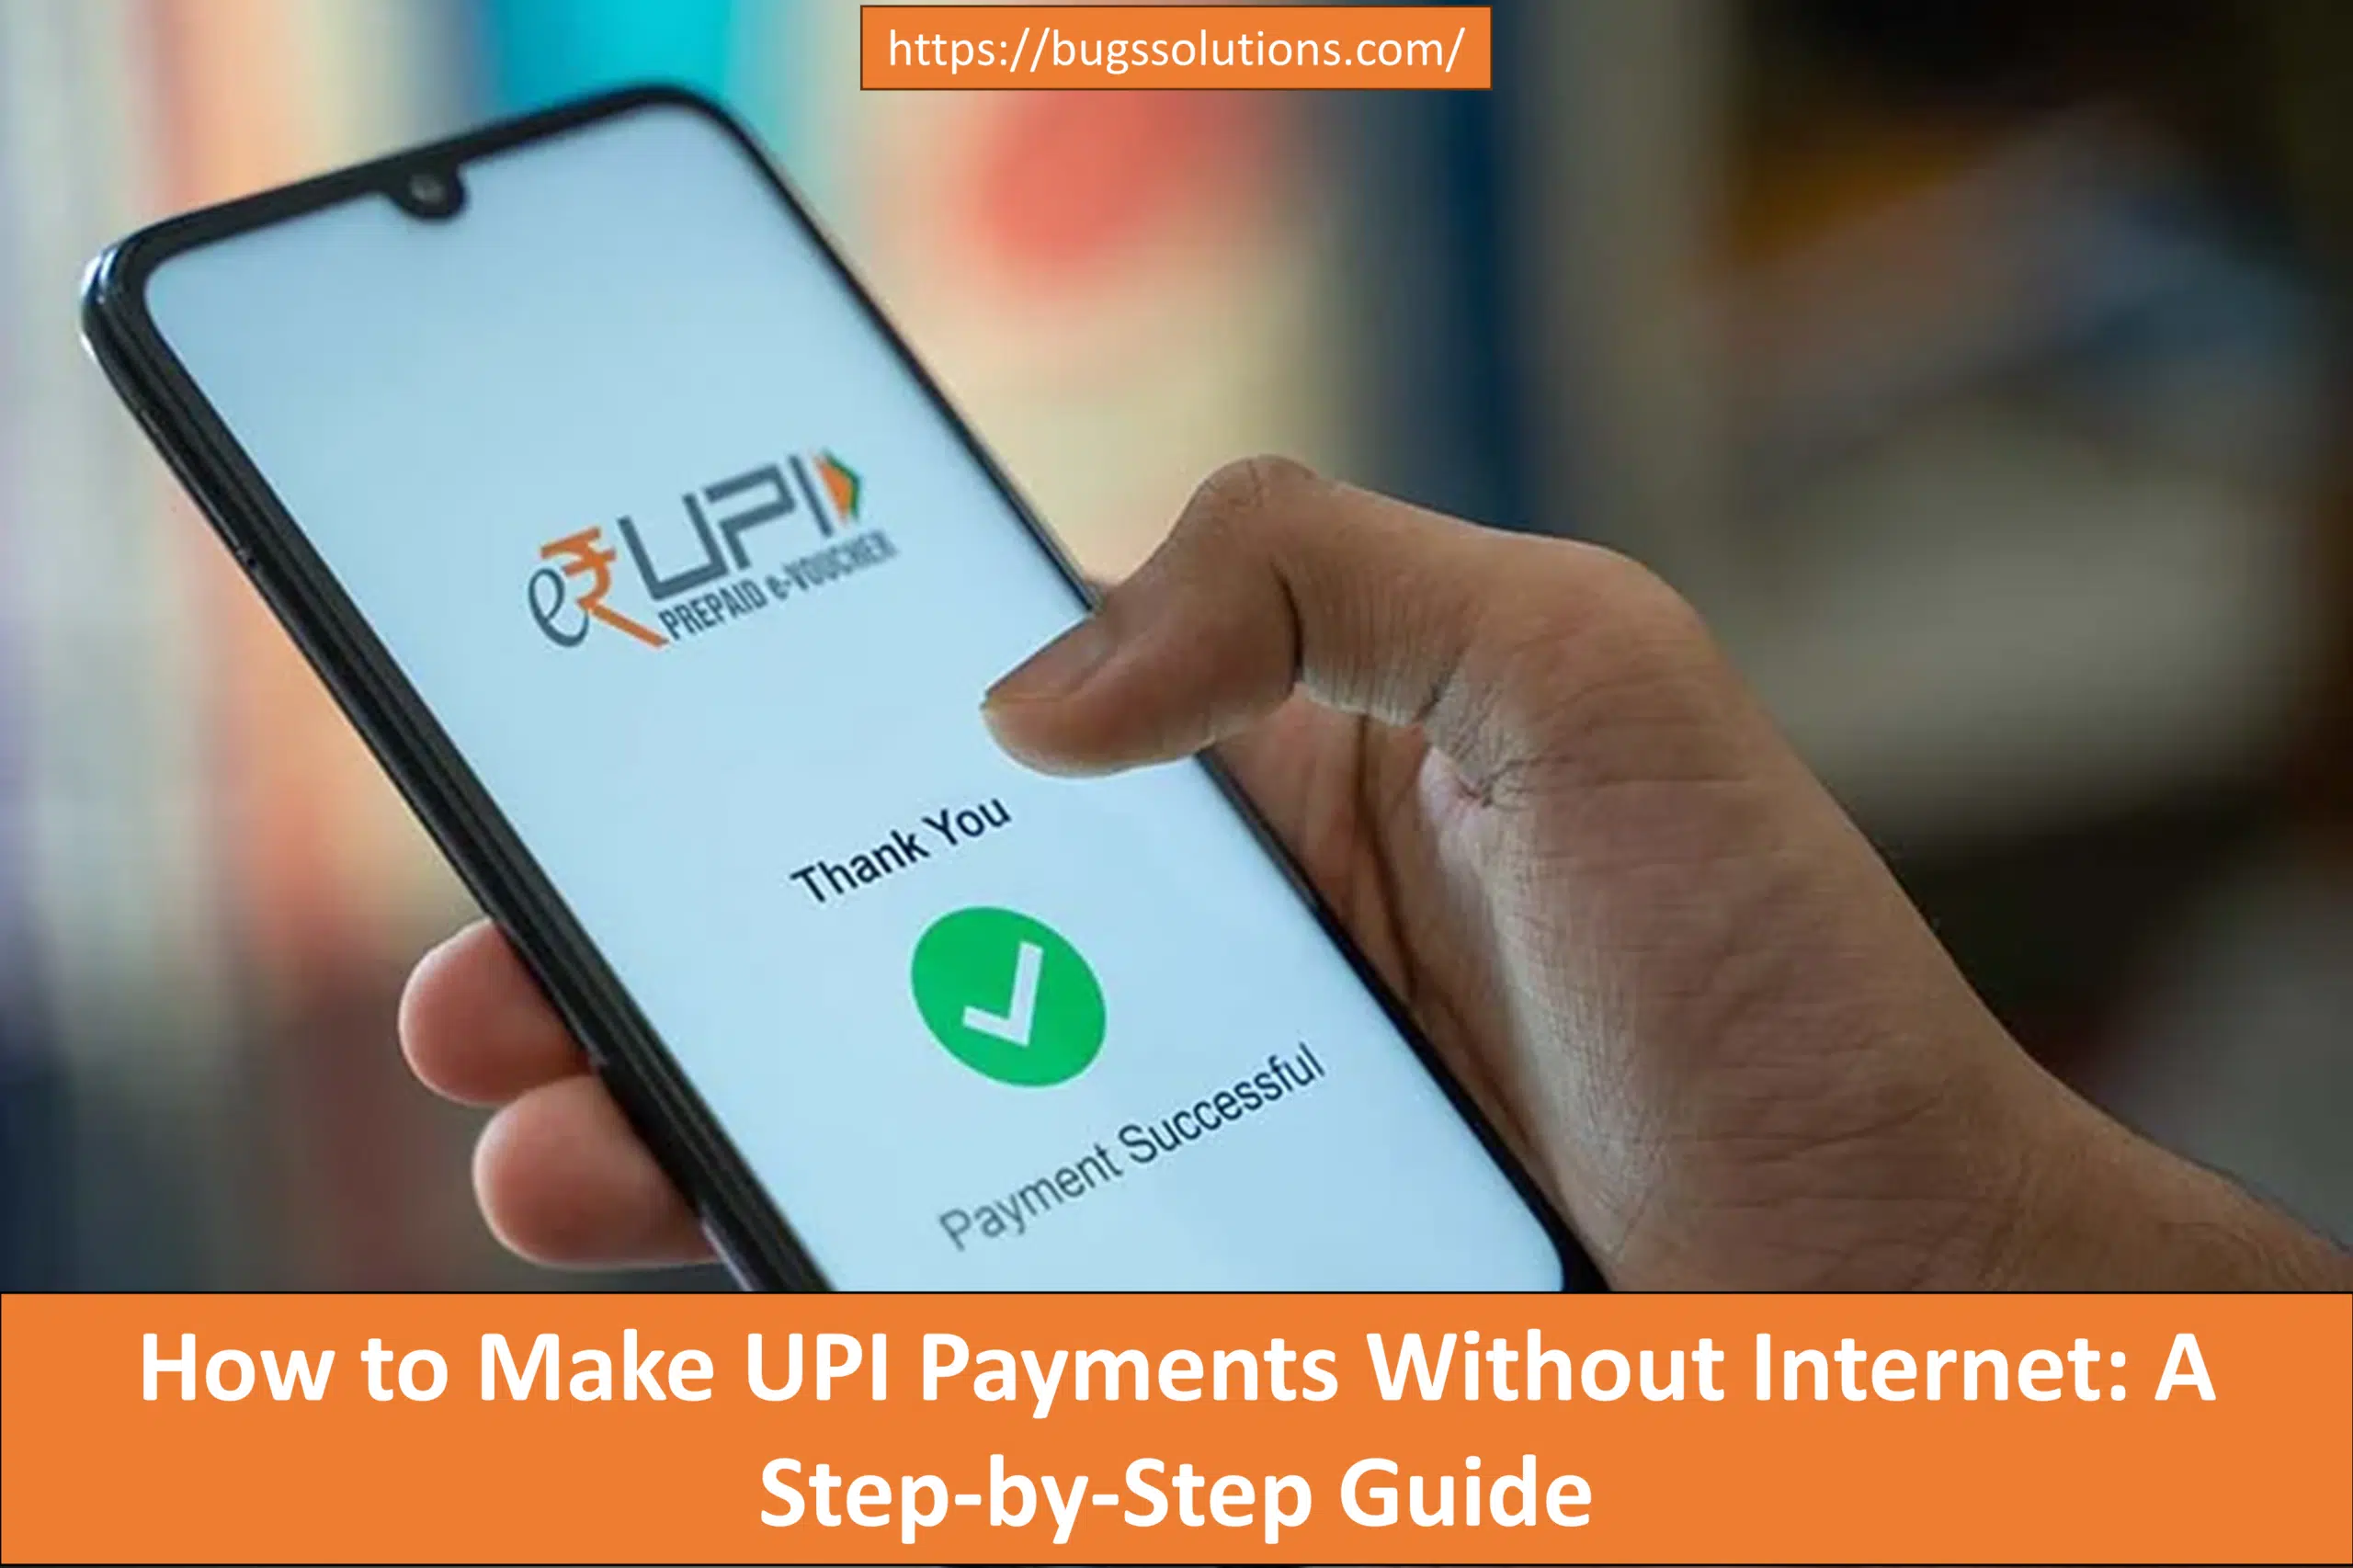 How to Make UPI Payments Without Internet: A Step-by-Step Guide